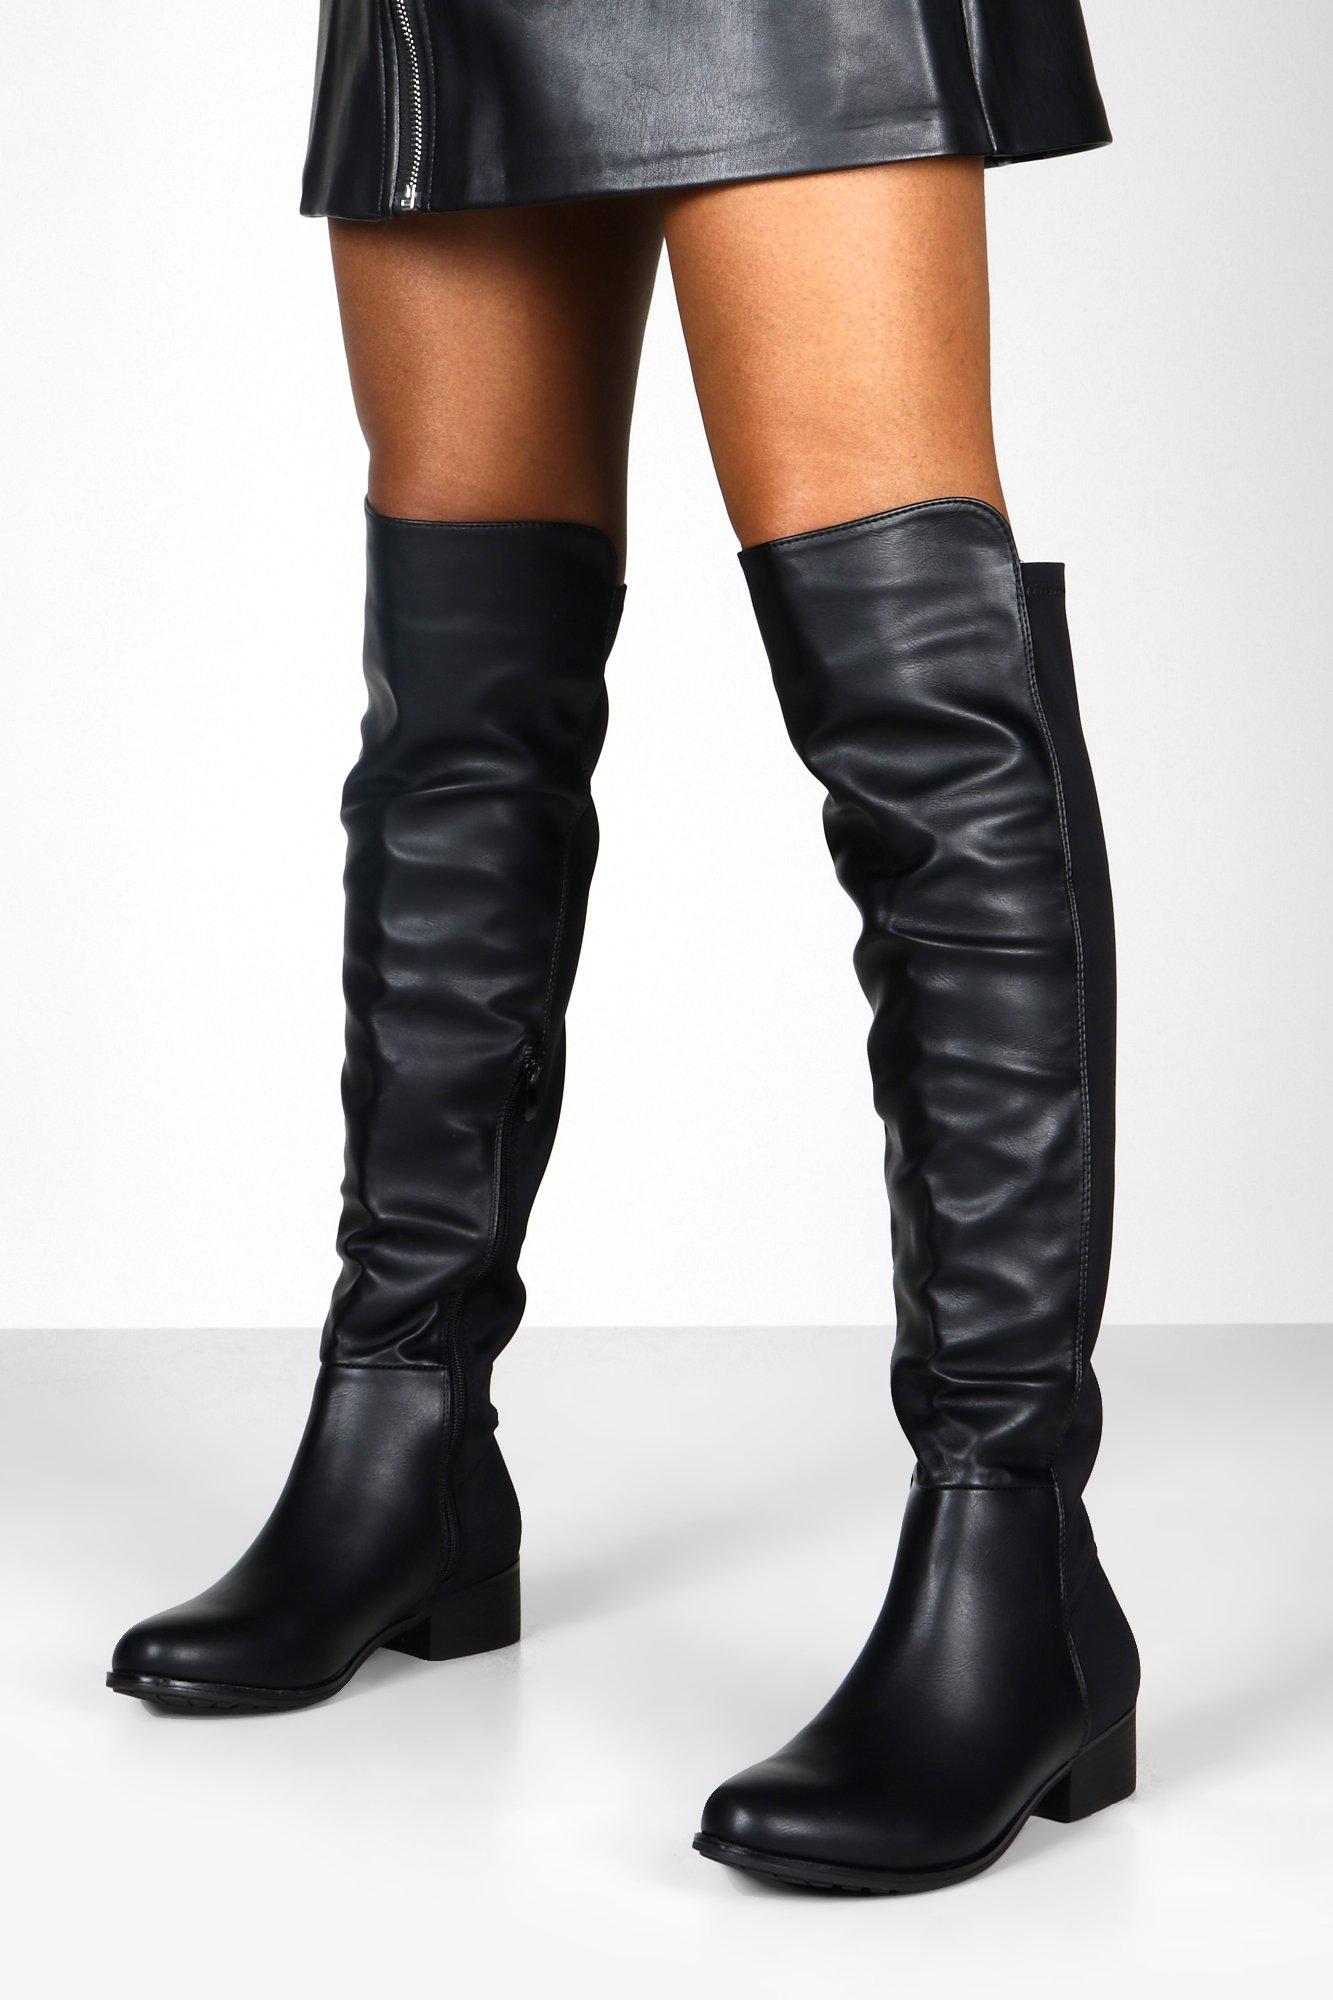 Over The Knee Boots | Thigh High Boots 